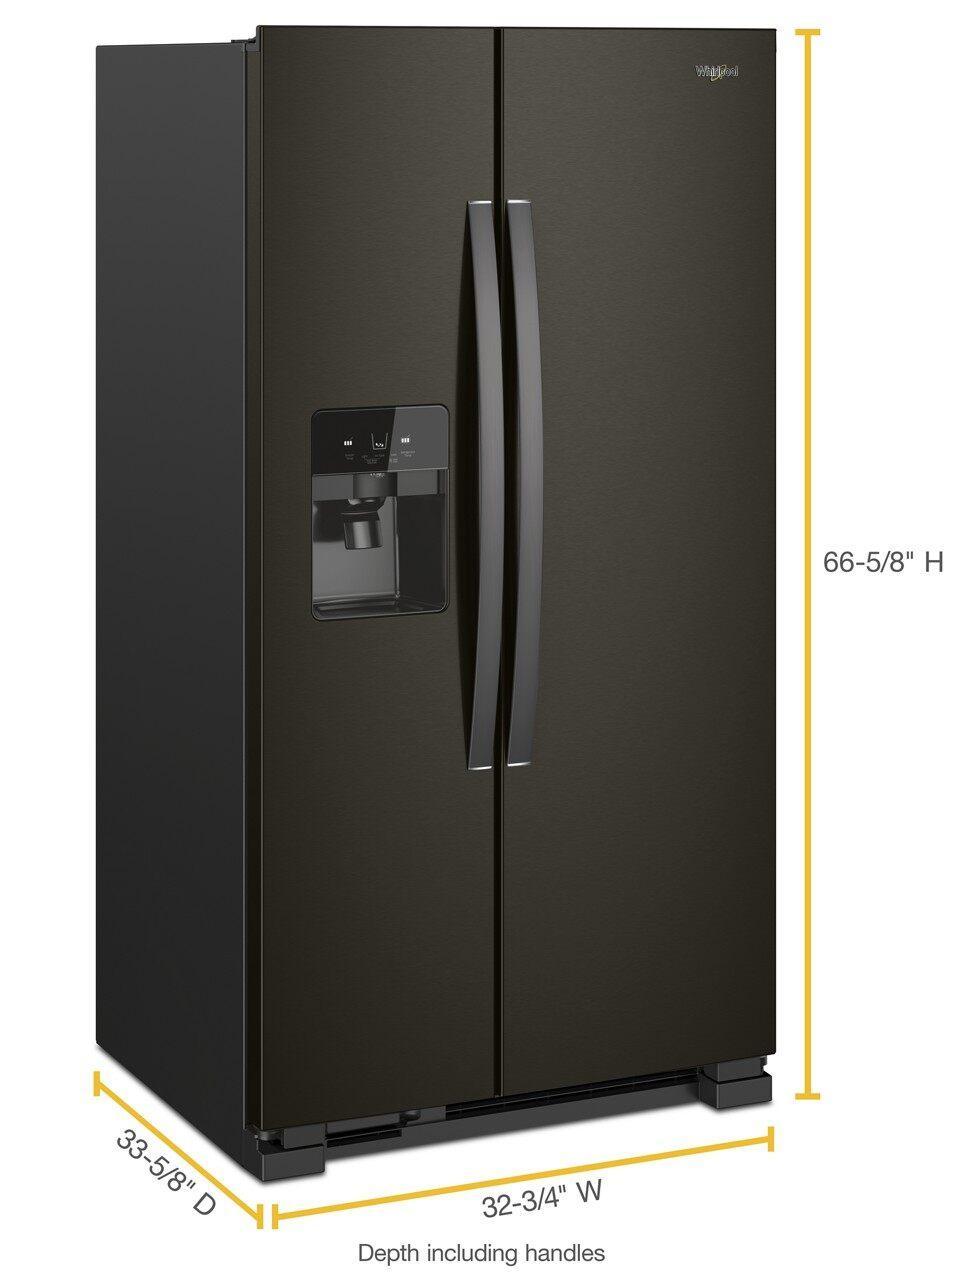 Whirlpool - 32.75 Inch 21 cu. ft Side by Side Refrigerator in Black Stainless - WRS321SDHV